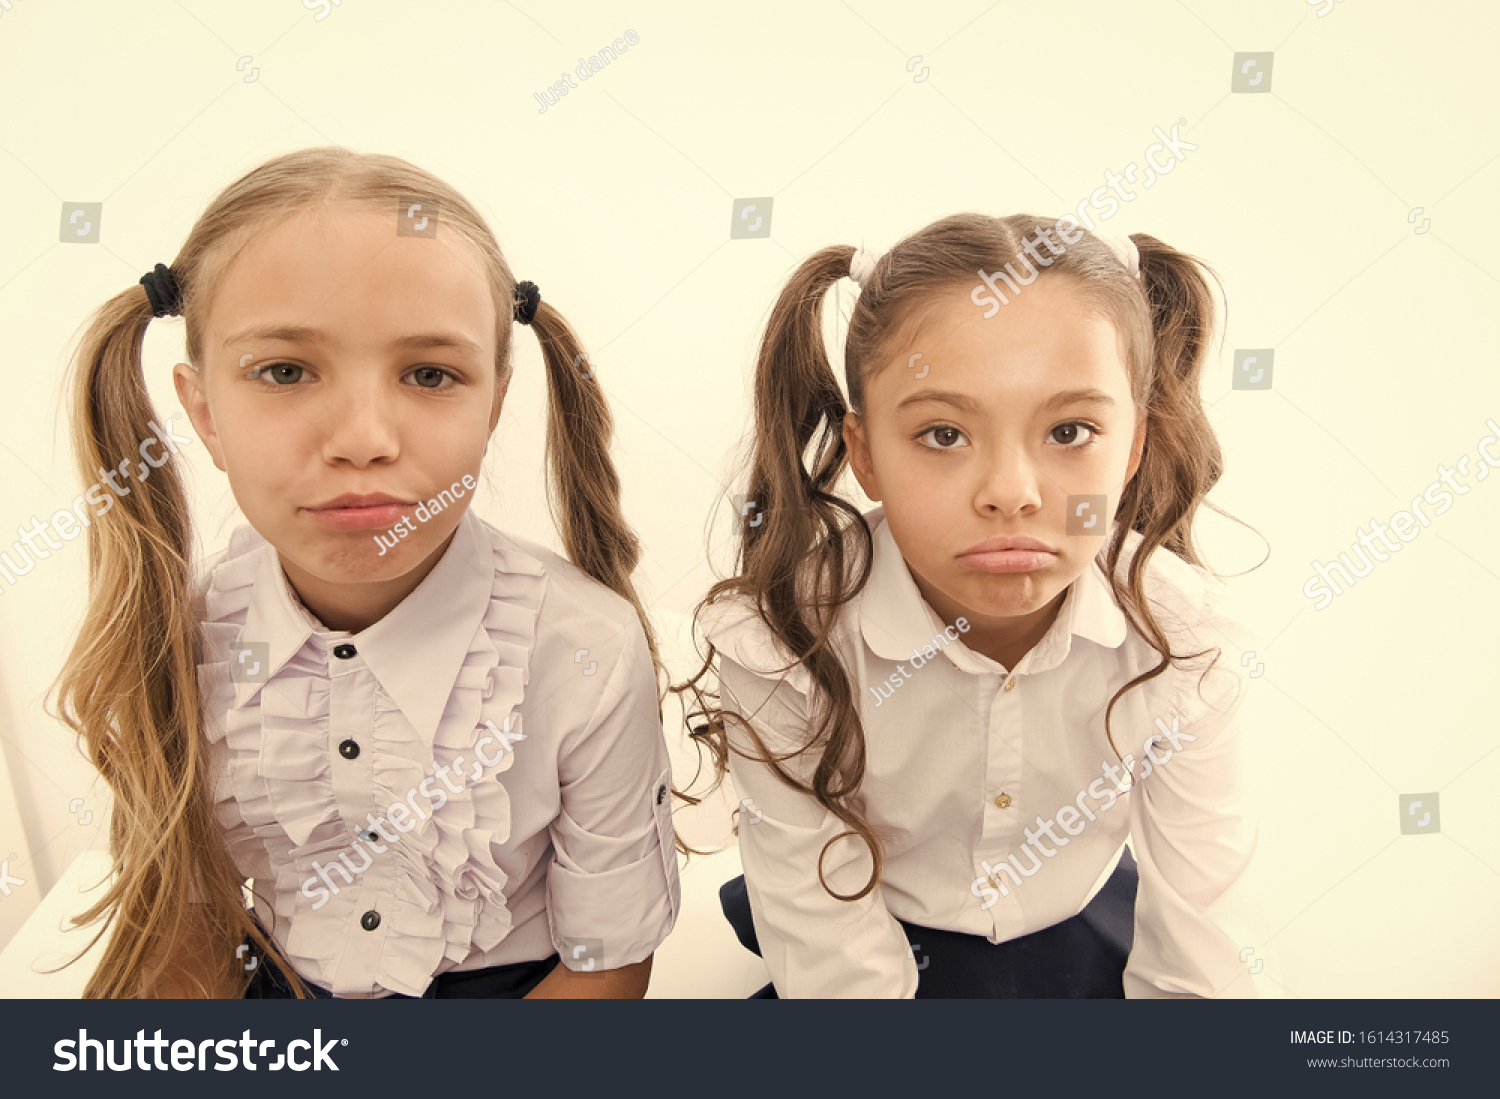 Unhappy cuties. Unhappy little schoolchildren isolated on white. Adorable small girls with unhappy emotions looking in camera. Unhappy because of school starts. #1614317485